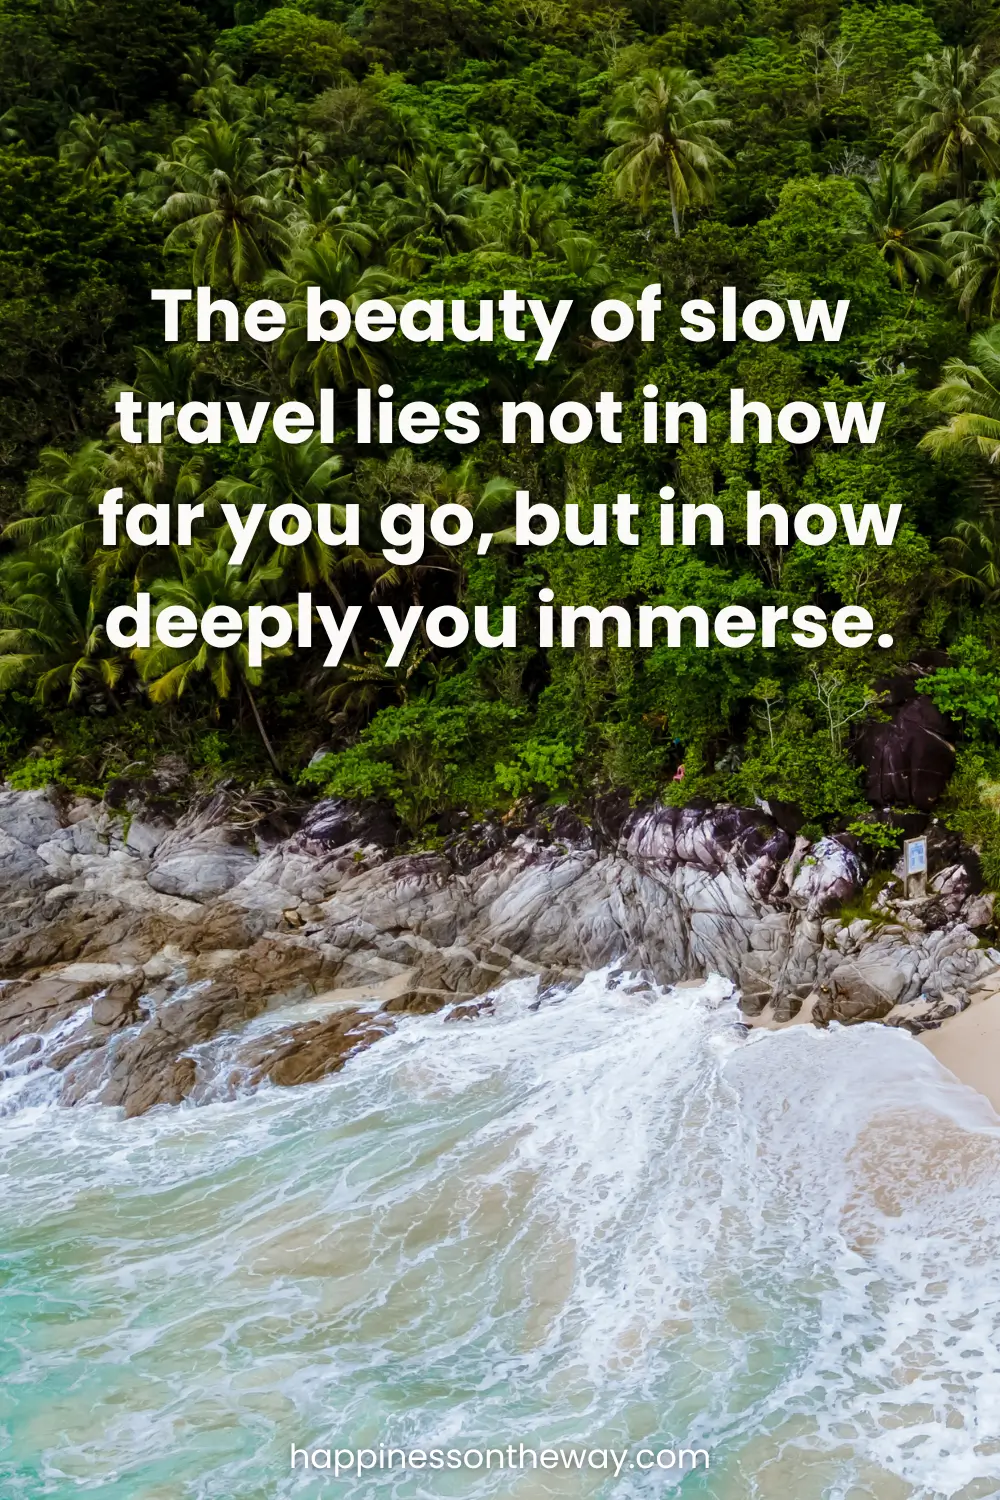 Slow Travel quote over a serene tropical beach scene in Freedom Beach Phuket, reading 'The beauty of slow travel lies not in how far you go, but in how deeply you immerse.' Website credit happinessontheway.com at the bottom.